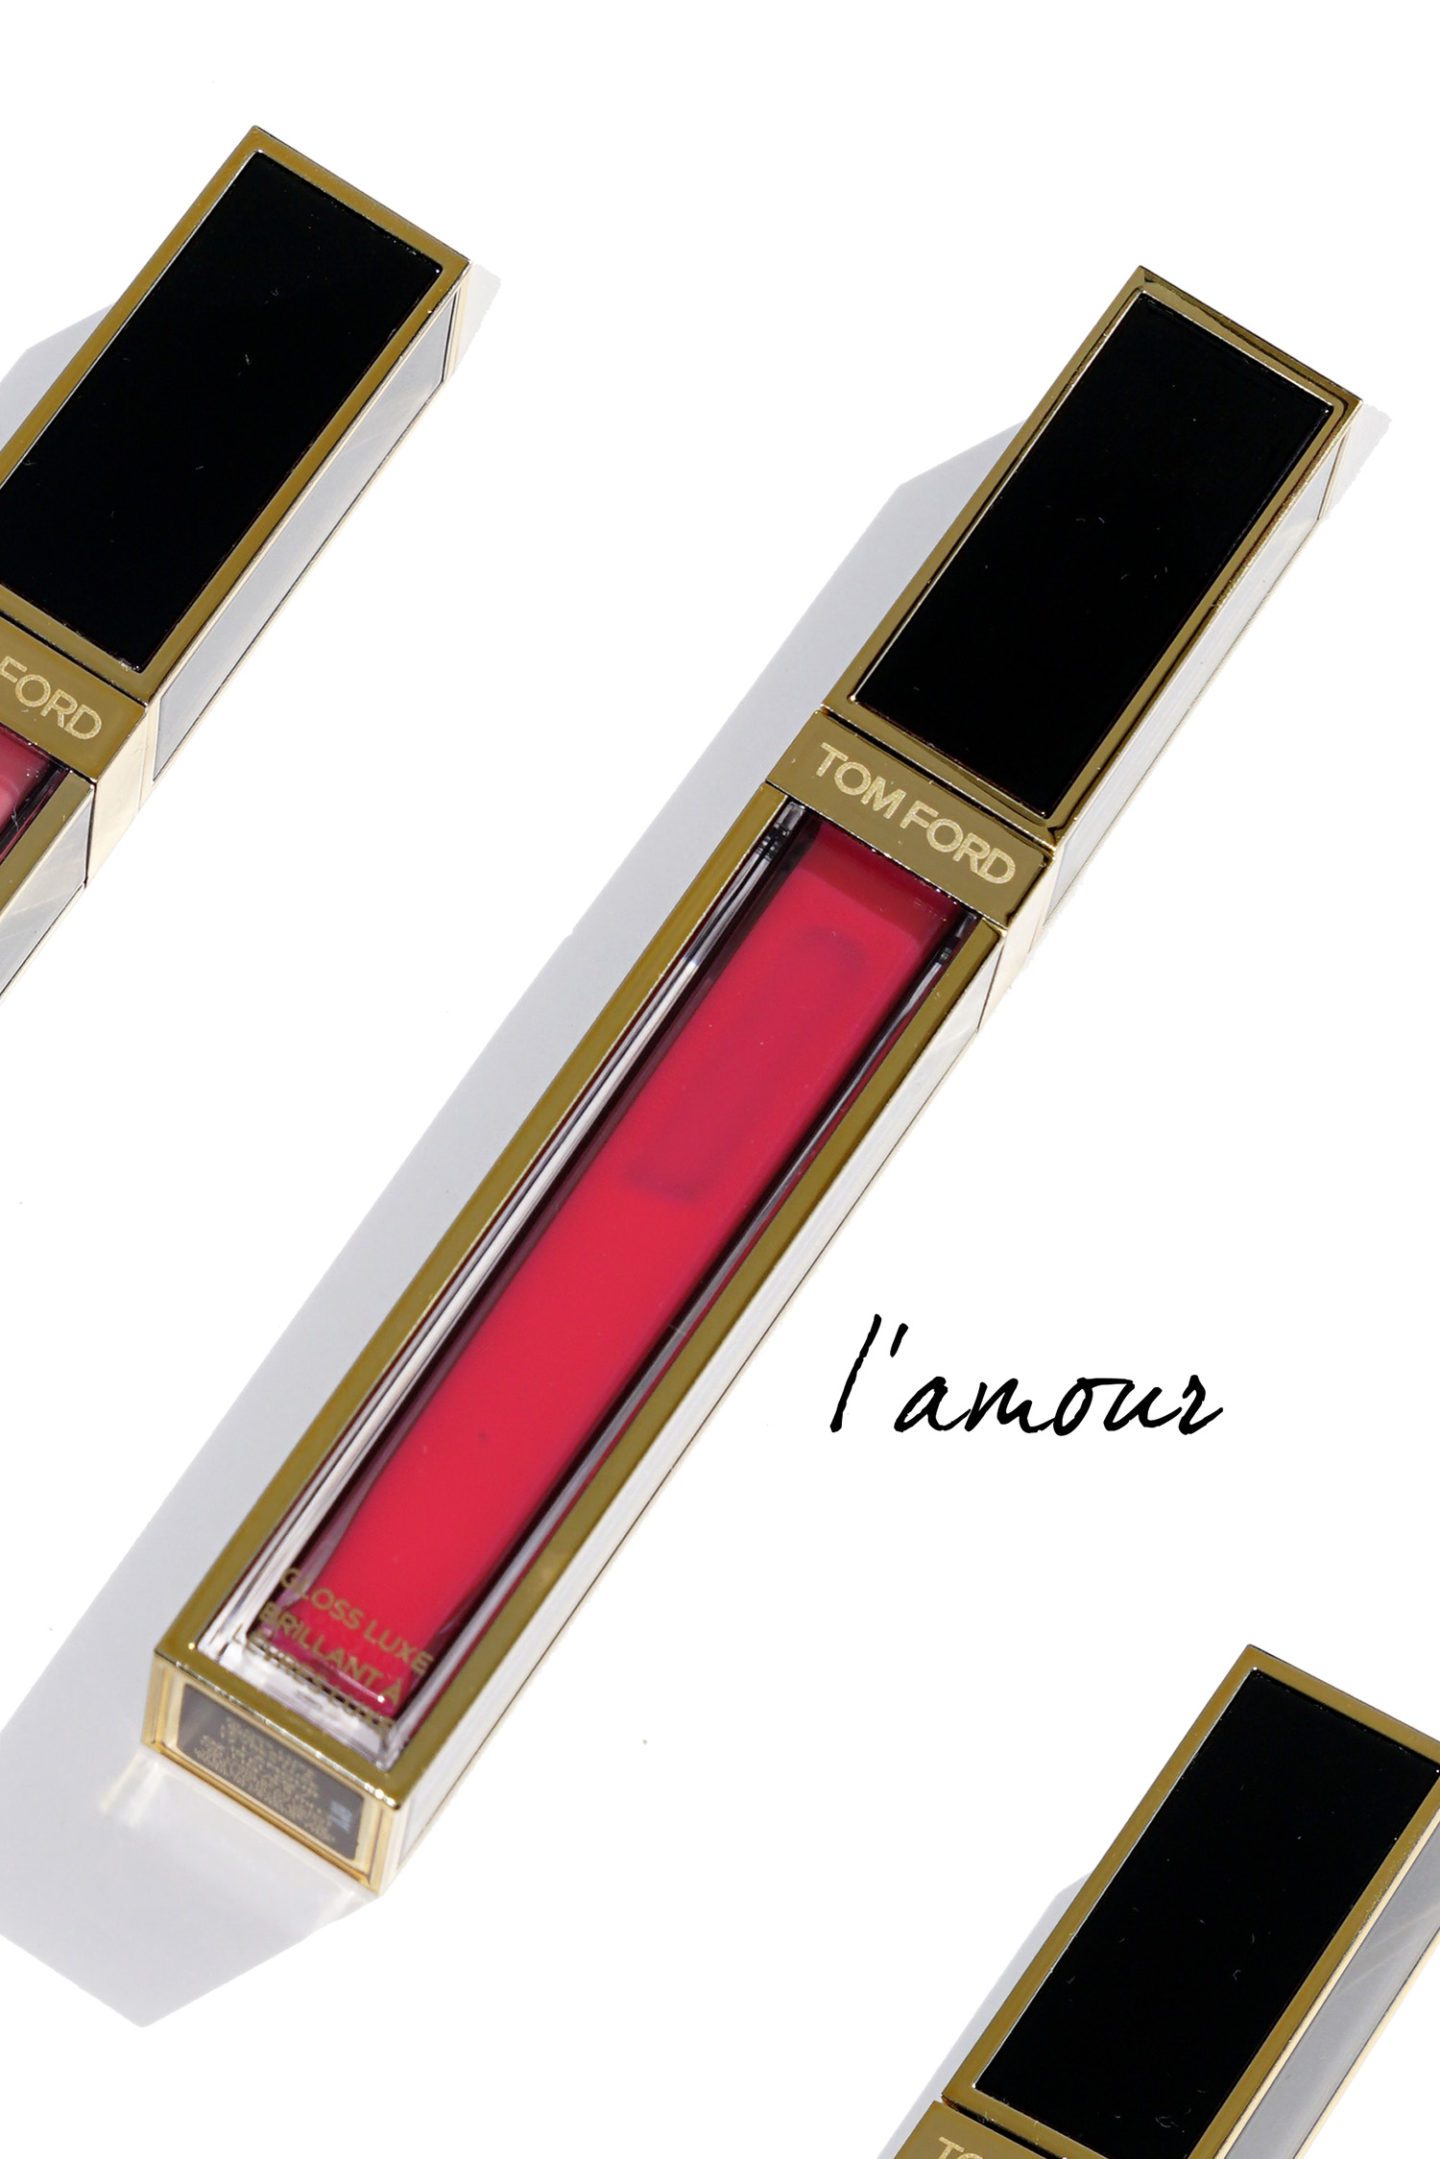 Tom Ford Gloss Luxe L'Amour